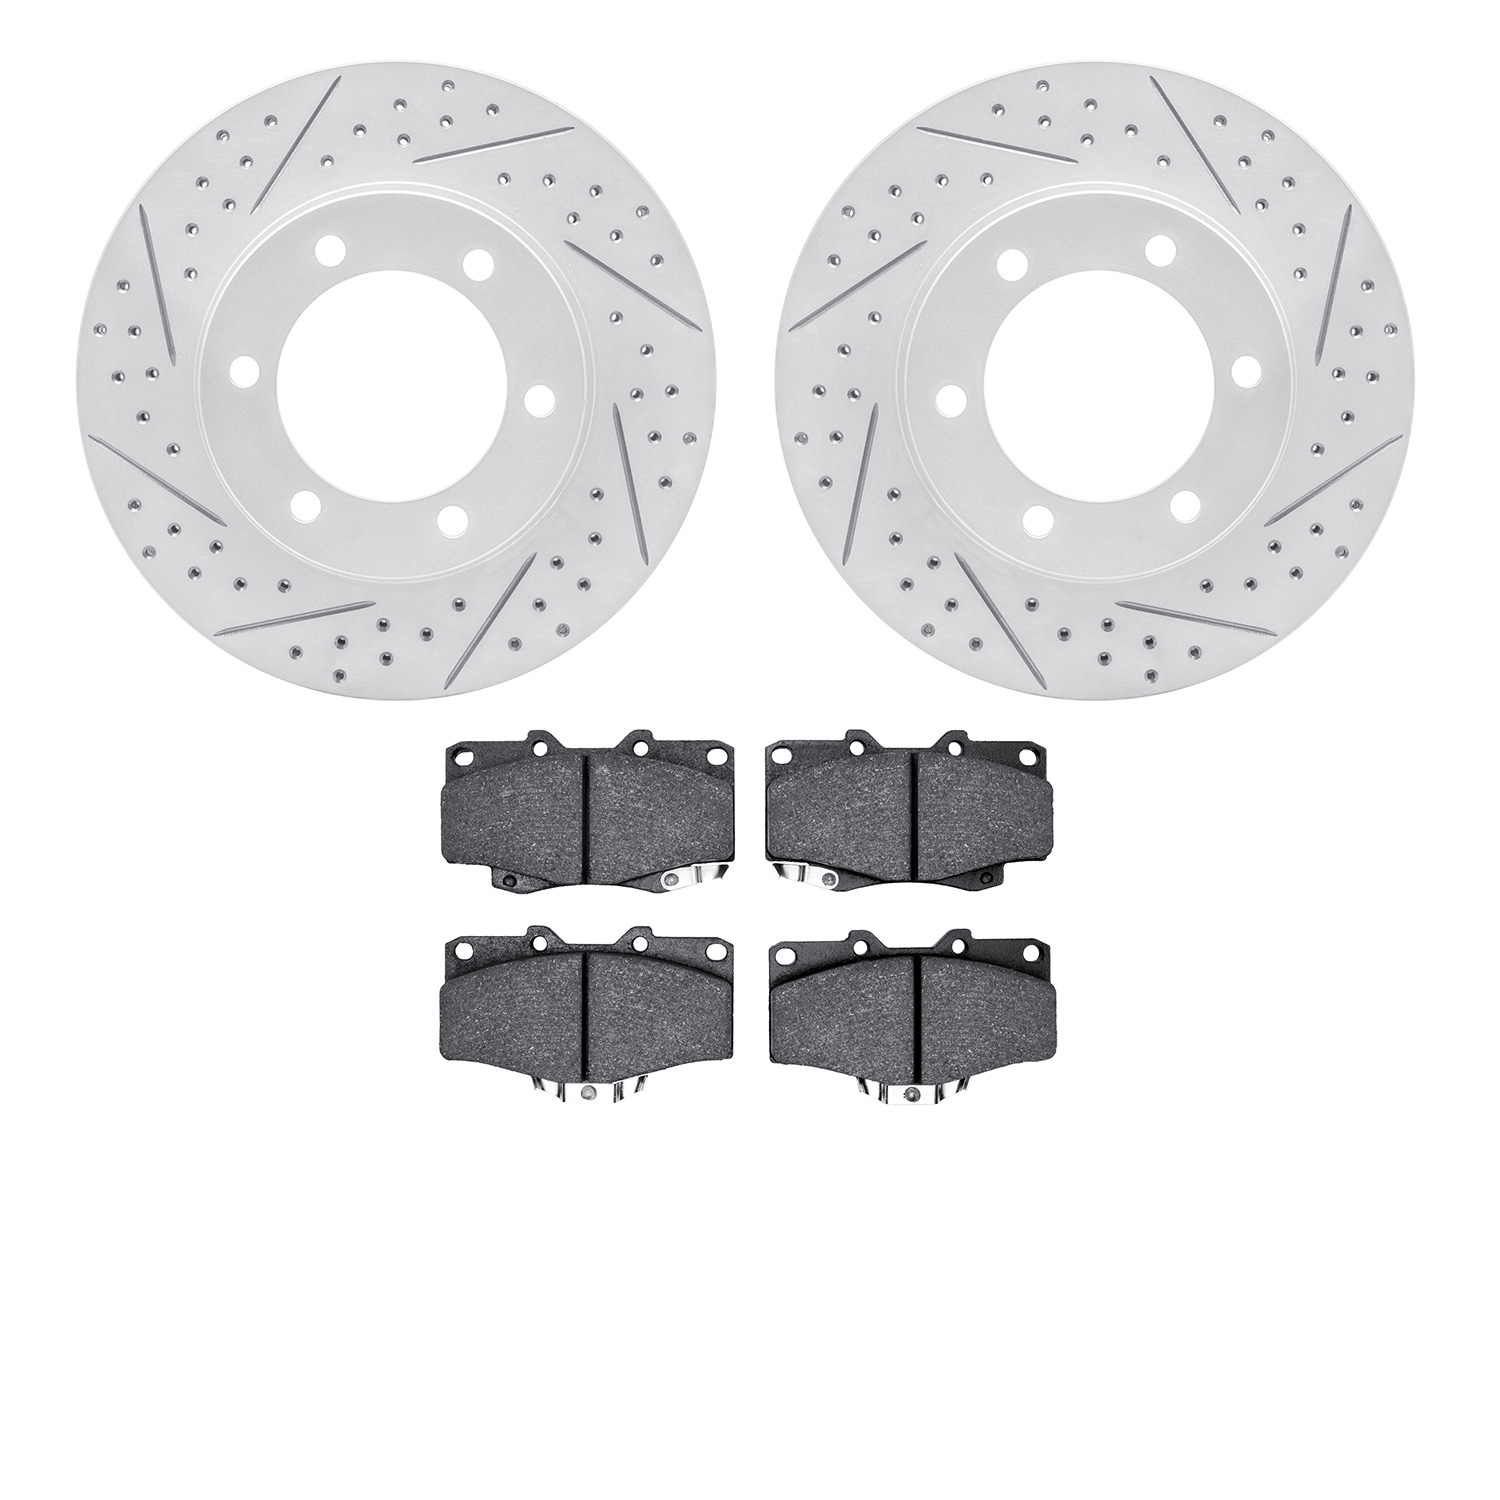 2402-76006 Geoperformance Drilled/Slotted Brake Rotors with Ultimate-Duty Brake Pads Kit, 1995-2004 Lexus/Toyota/Scion, Position